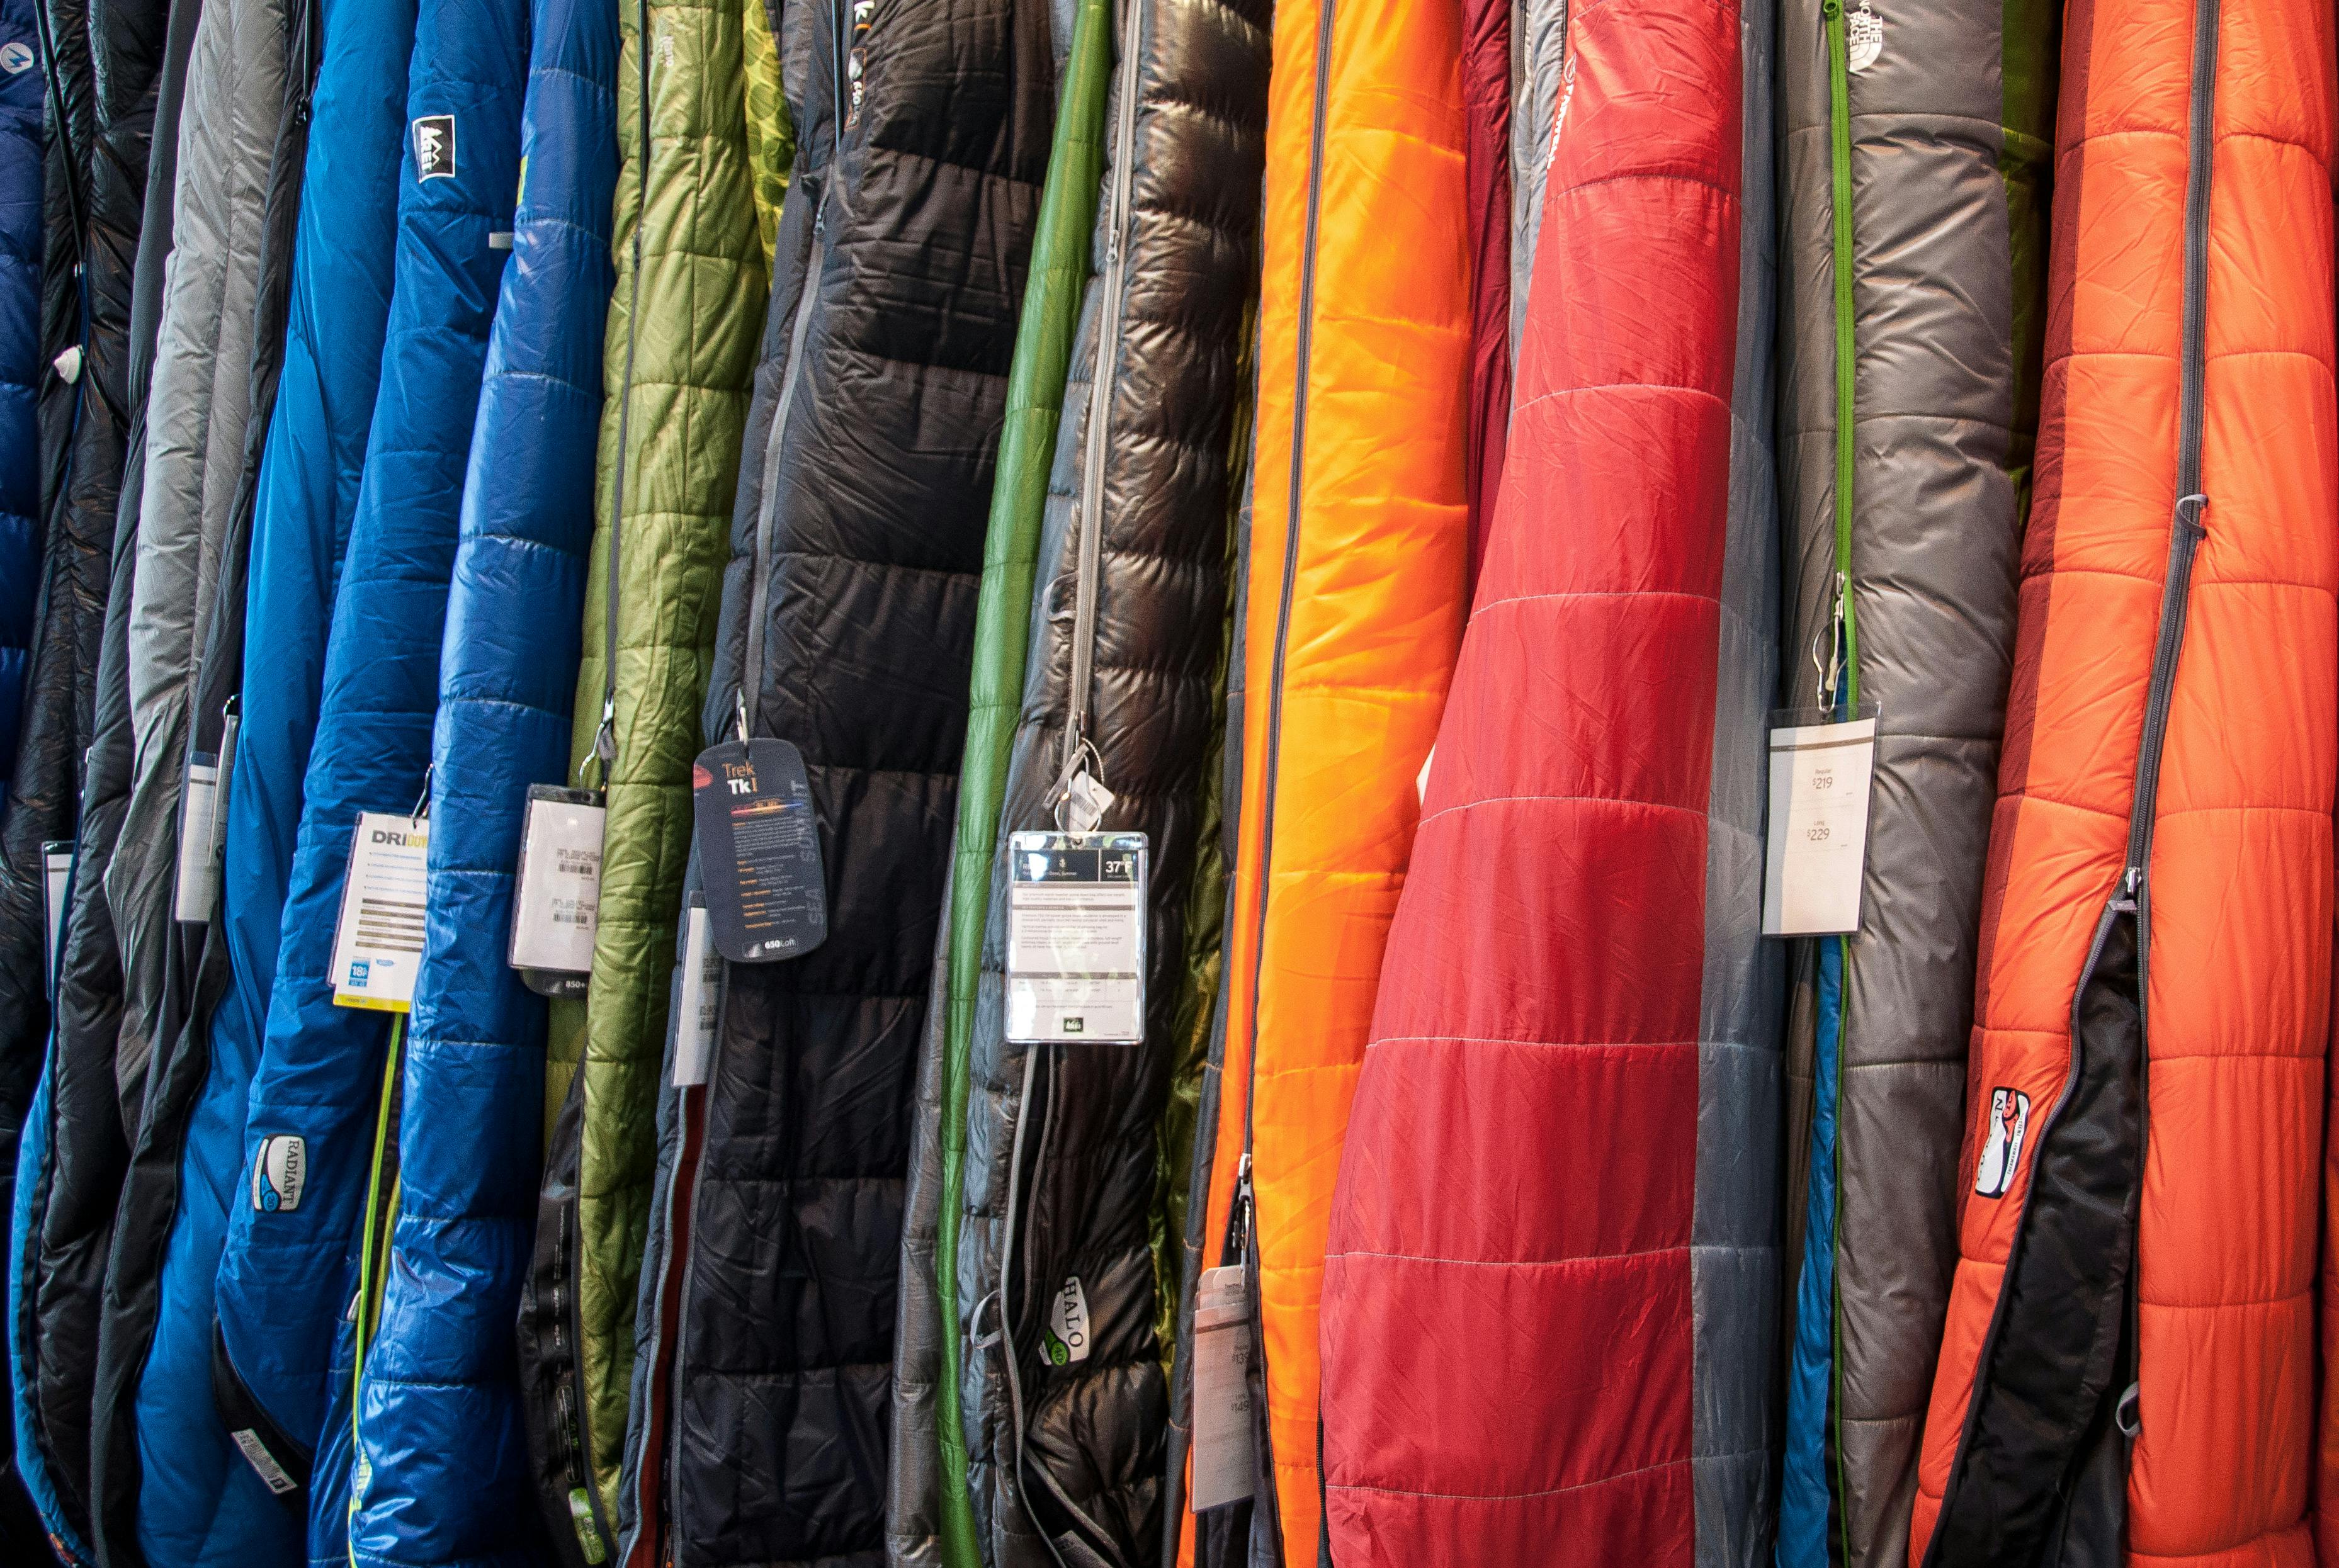 Several sleeping bags in varying colors are hung in a row. They have tags on as if they are still in a store.